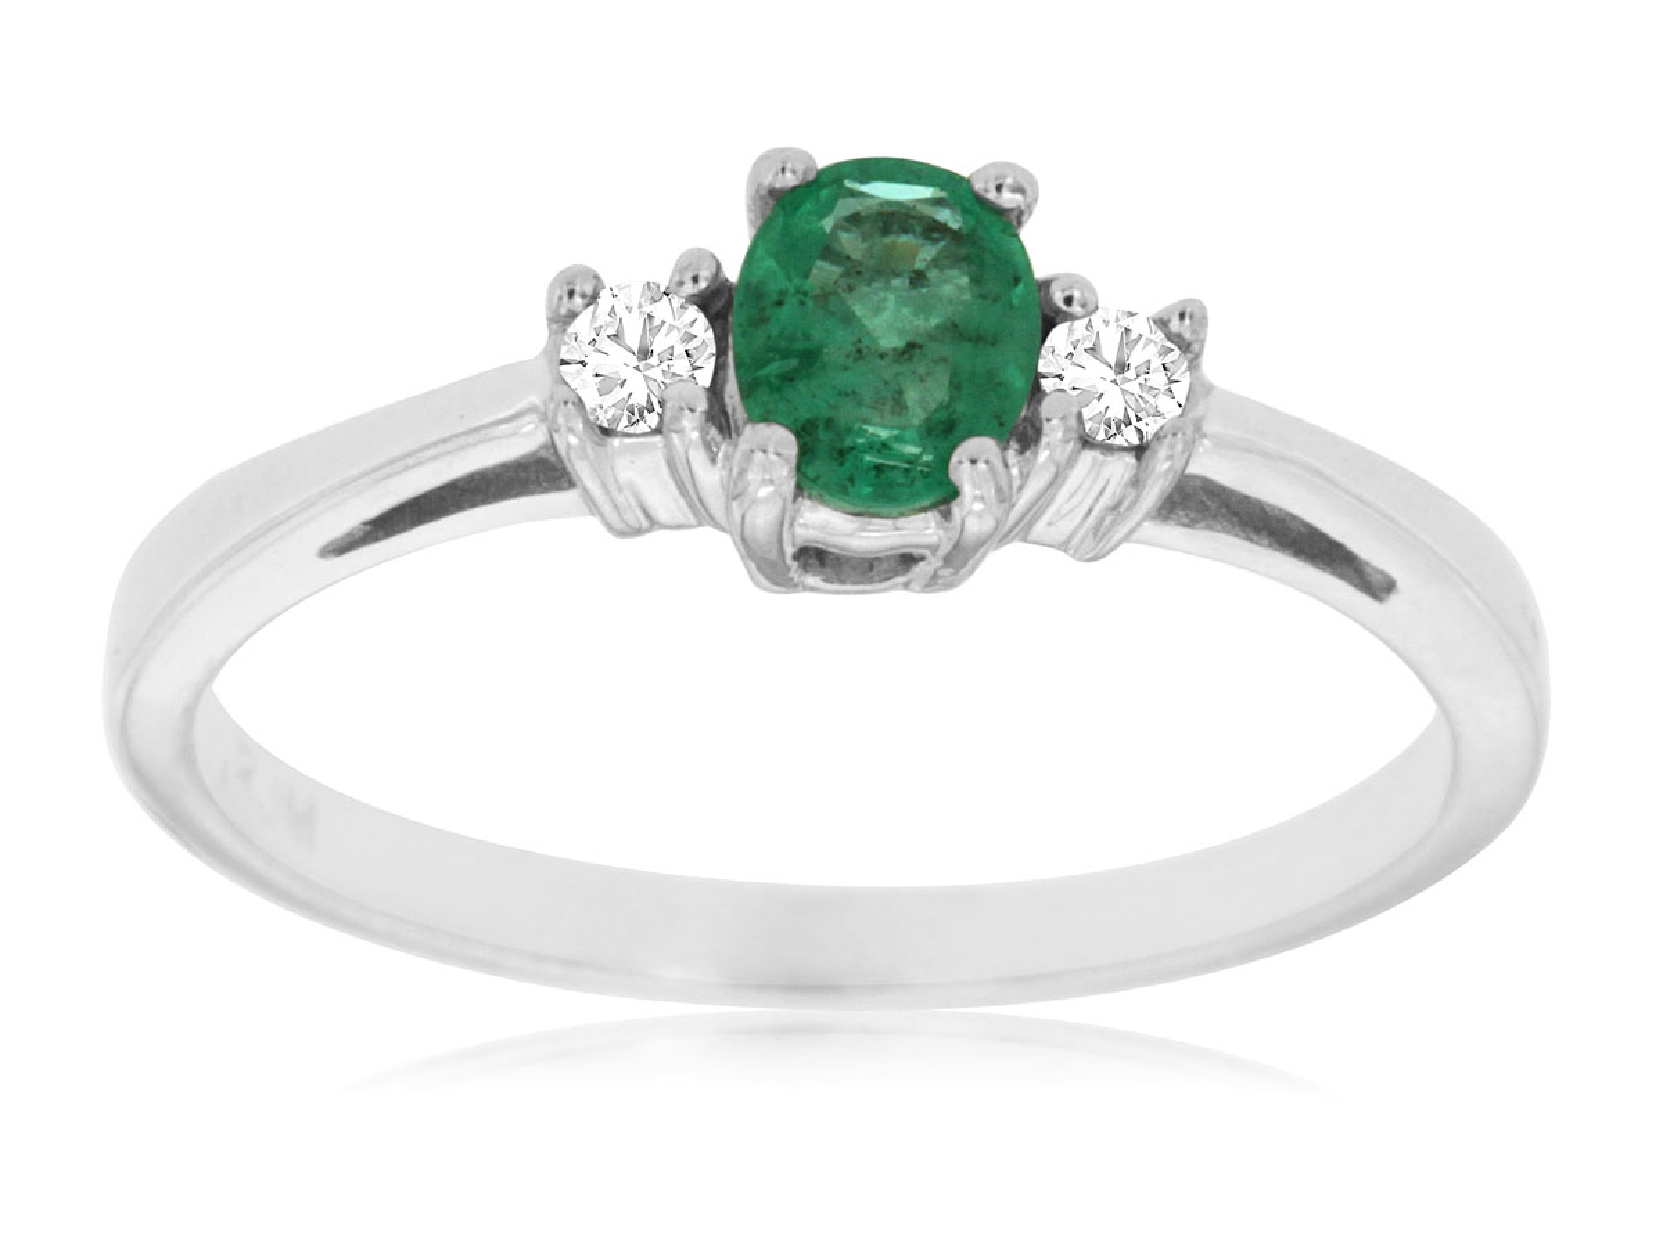 14K White Gold Emerald Ring with Small Diamond Accents Size 7
.08CT Diamonds .4CT Emeralds  
W3106EM